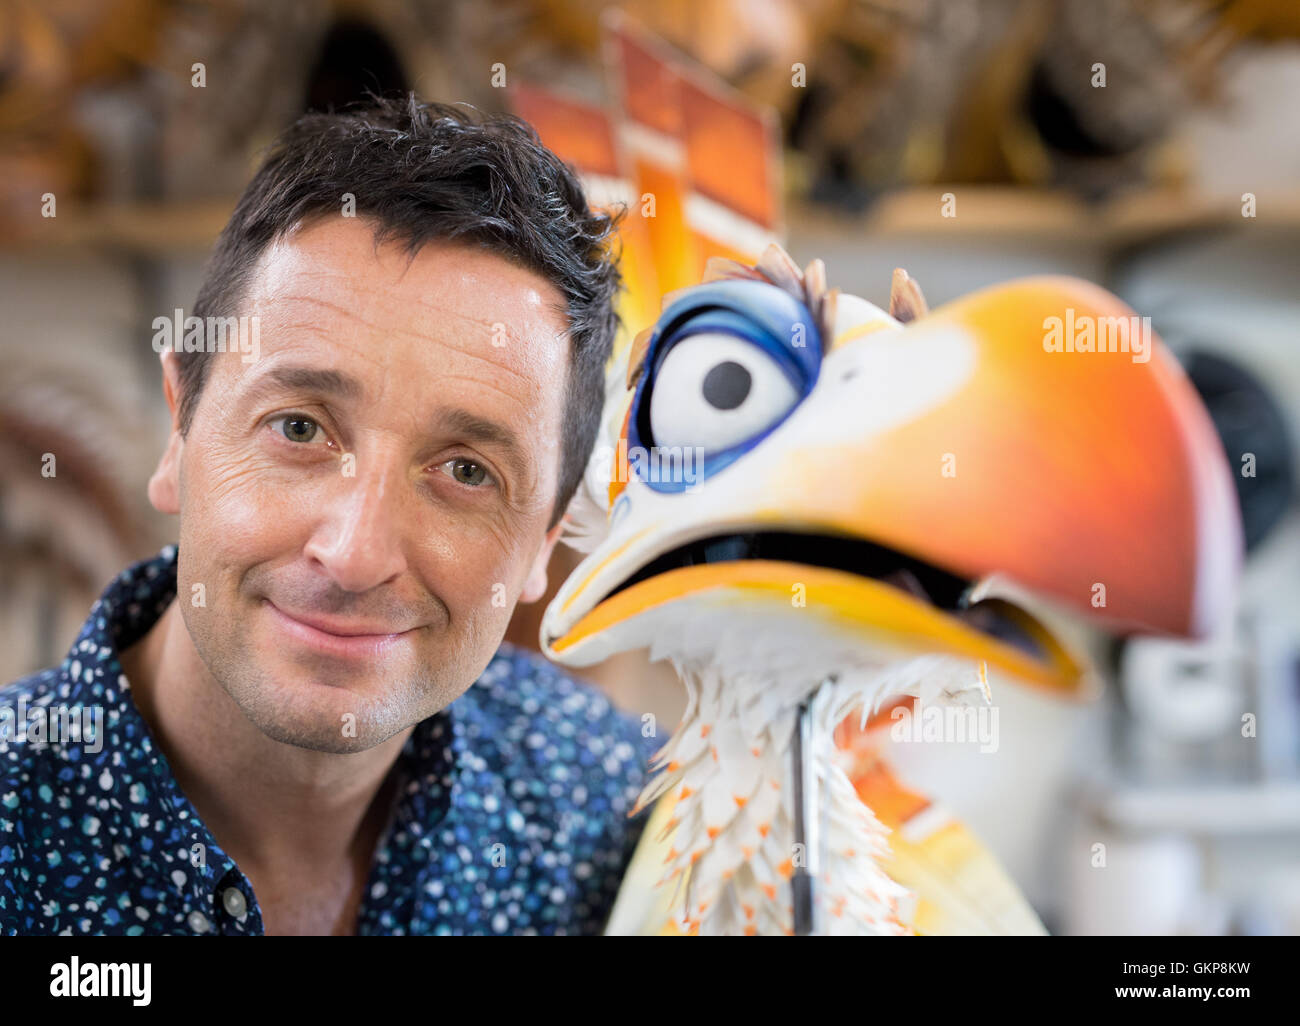 Hamburg, Germany. 10th Aug, 2016. Joachim Benoit, performer in the musical The Lion King poses with a puppet of the bird Zazu, in the Theater im Hafen in Hamburg, Germany, 10 August 2016. Benoit has been playing the role of the cheeky bird Zazu in the Hamburg staging of the musical The Lion King for 15 years. PHOTO: DANIEL REINHARDT/DPA/Alamy Live News Stock Photo